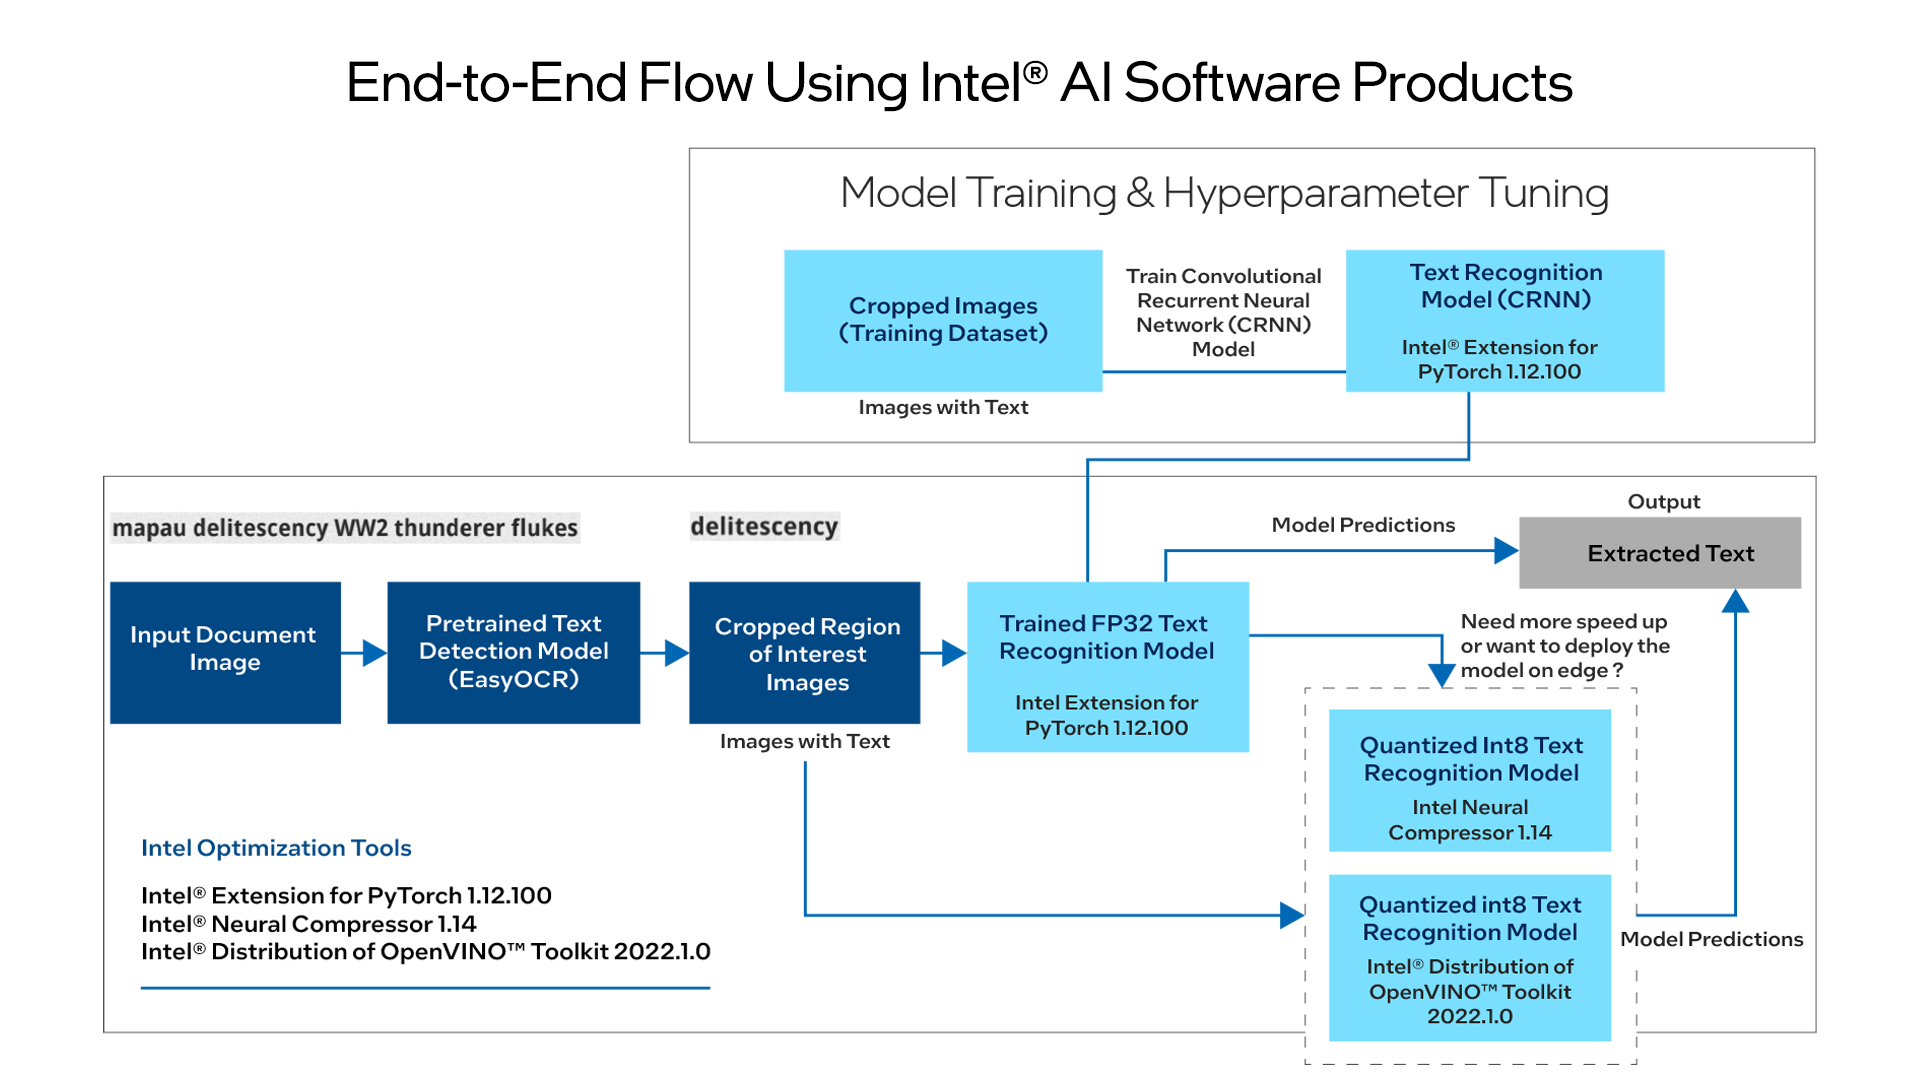 workflow for model training and hyperparameter tuning